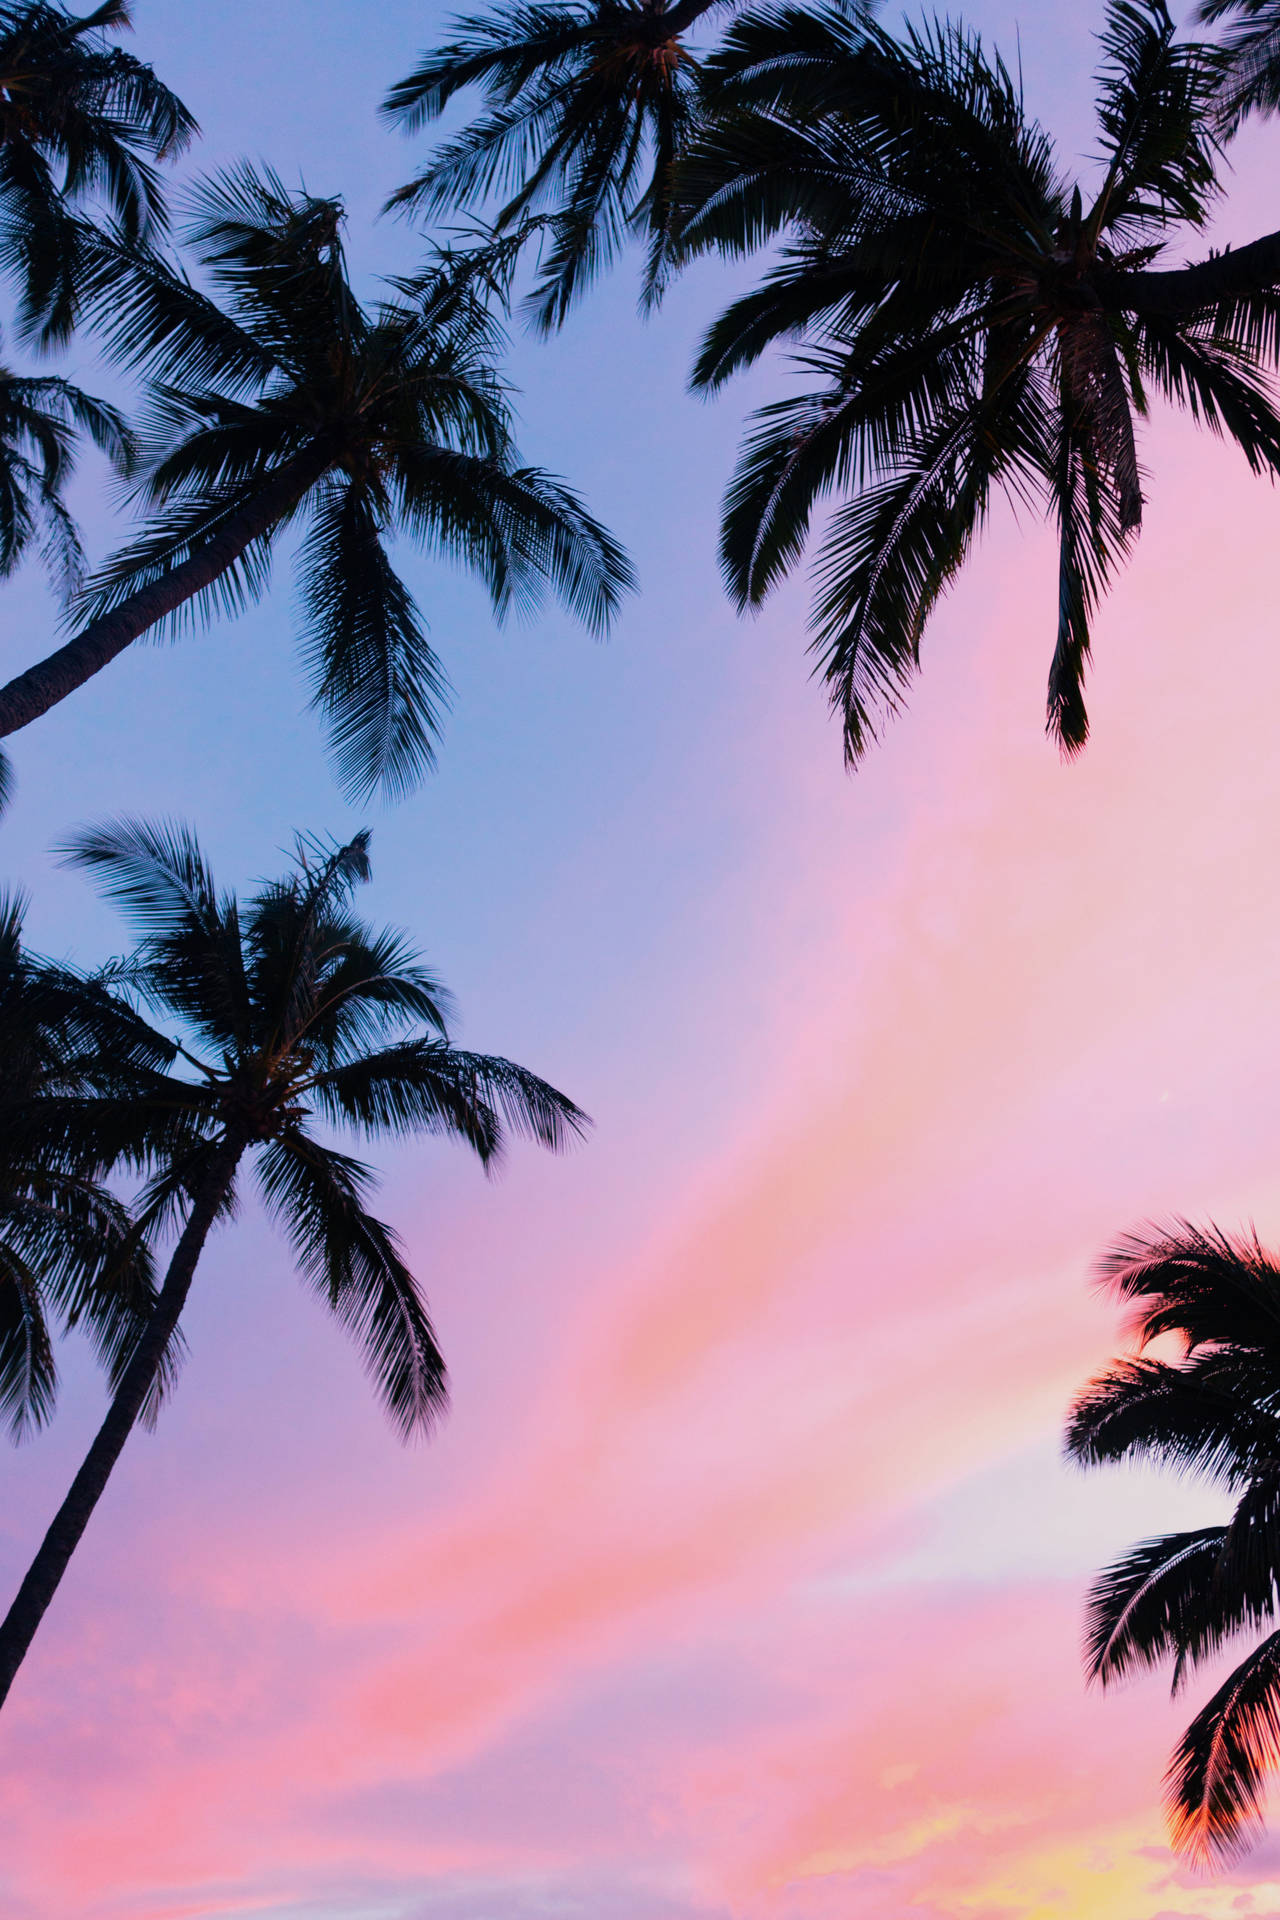 Enjoy the beauty of a pink sunset with your iPhone Wallpaper